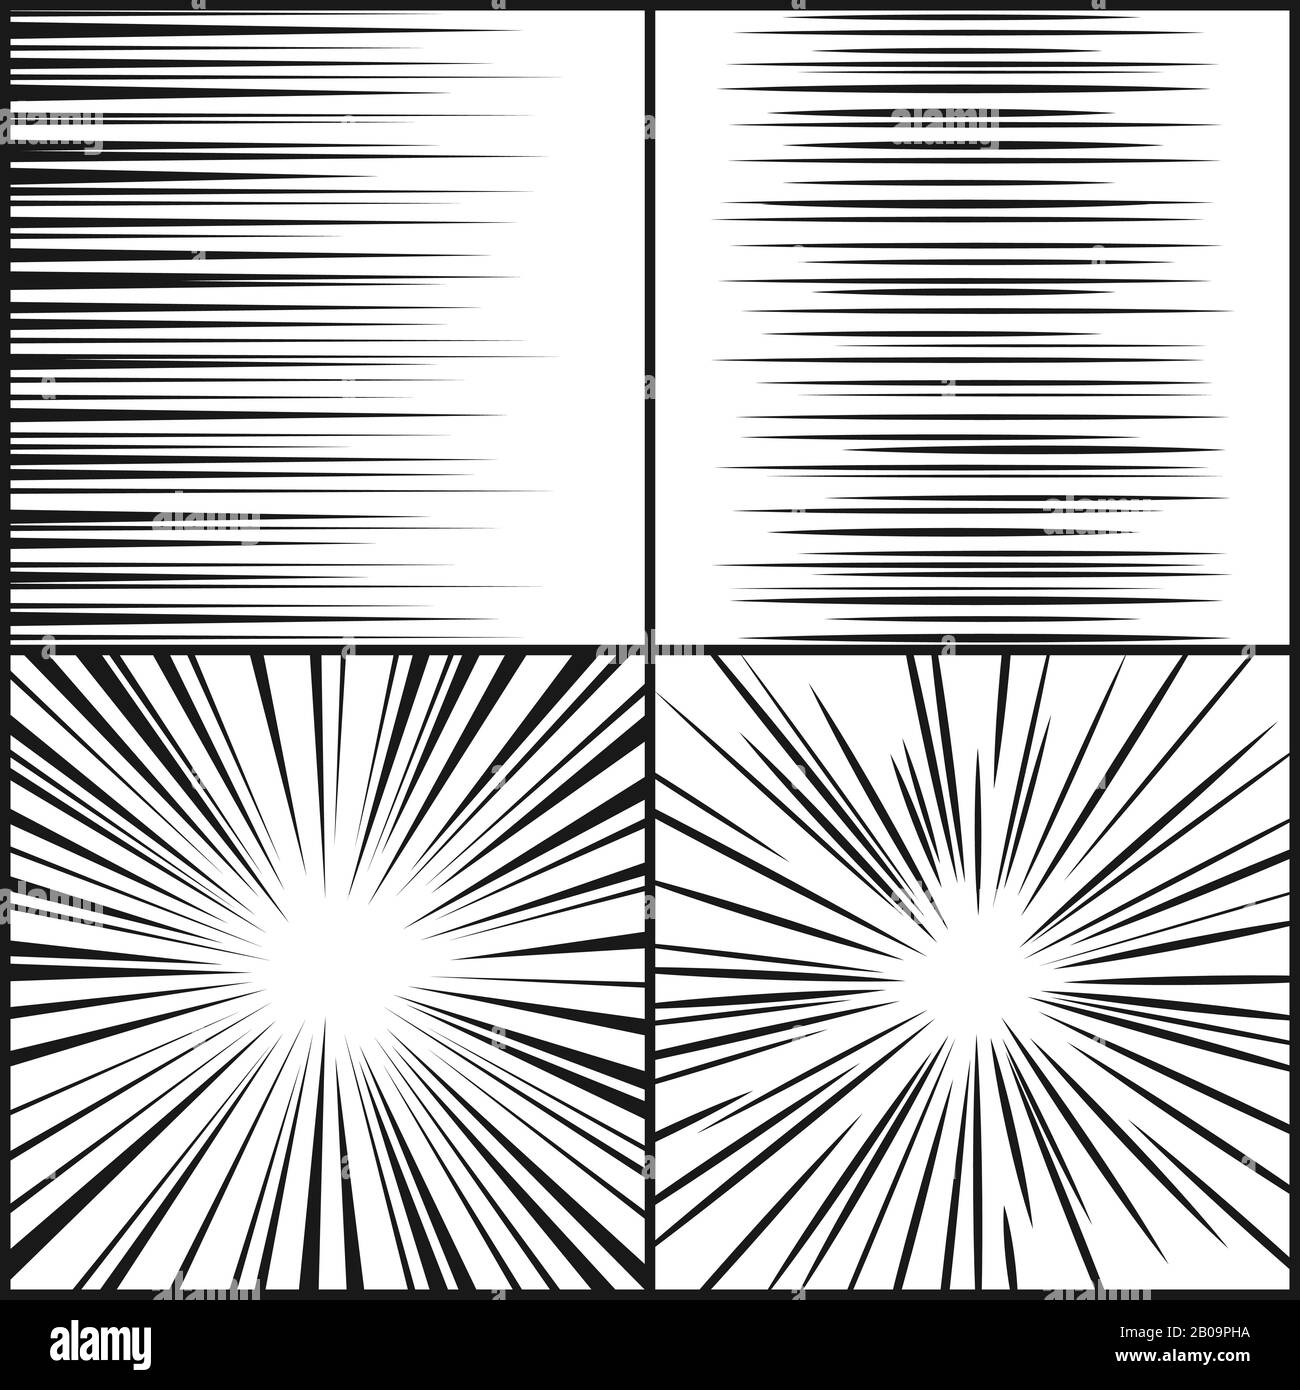 Radial Line Drawing. Action, Speed Lines, Stripes Stock Vector